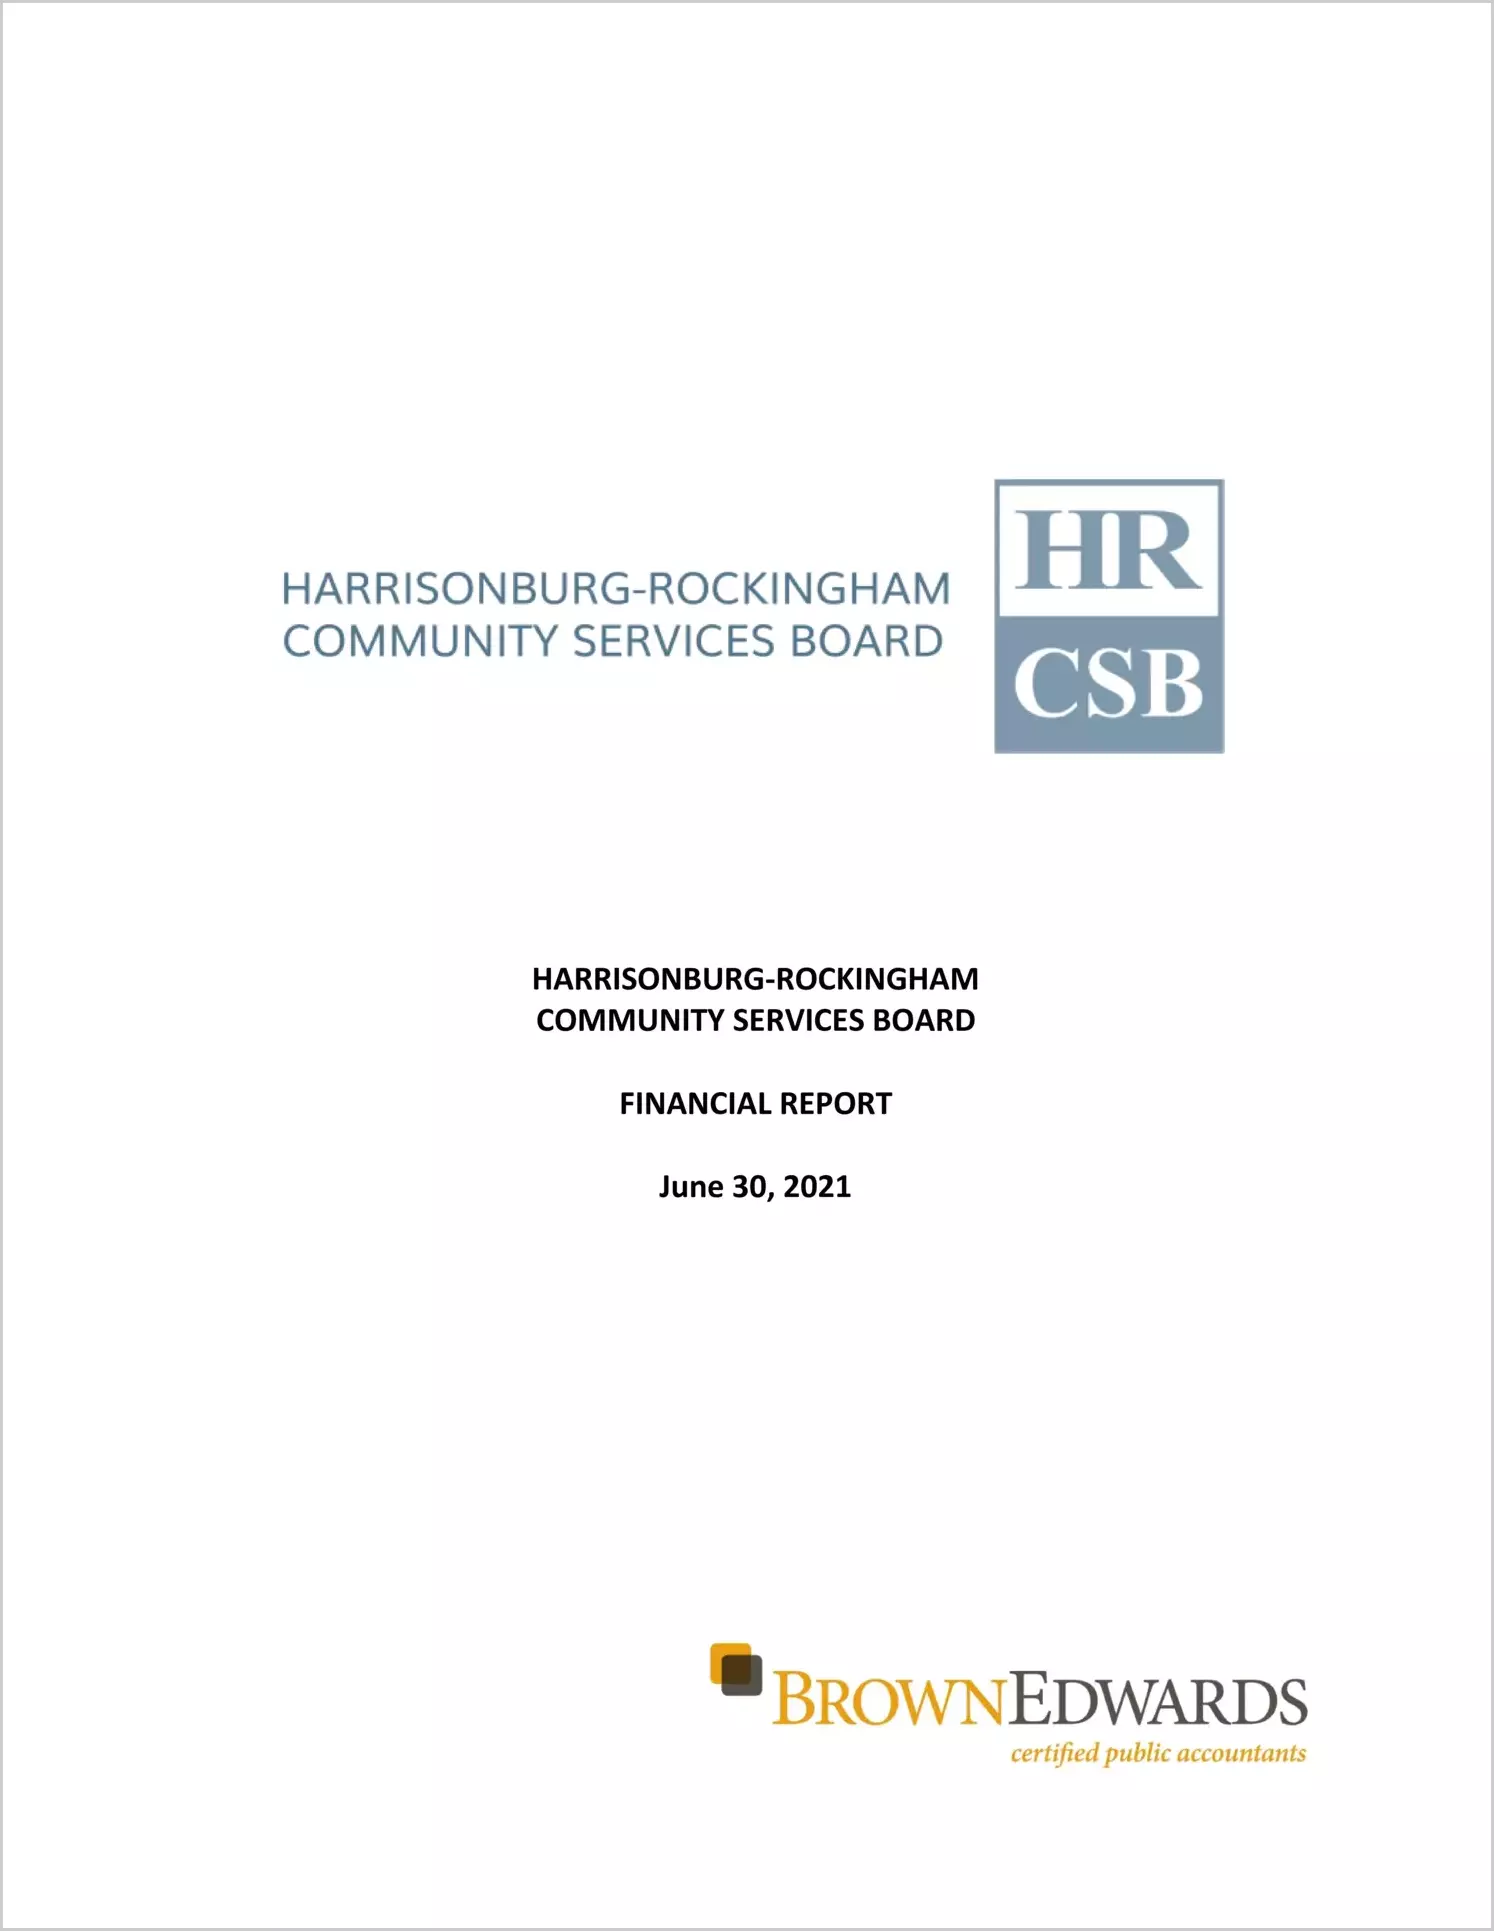 2021 ABC/Other Annual Financial Report  for Harrisonburg Rockingham Community Services Board